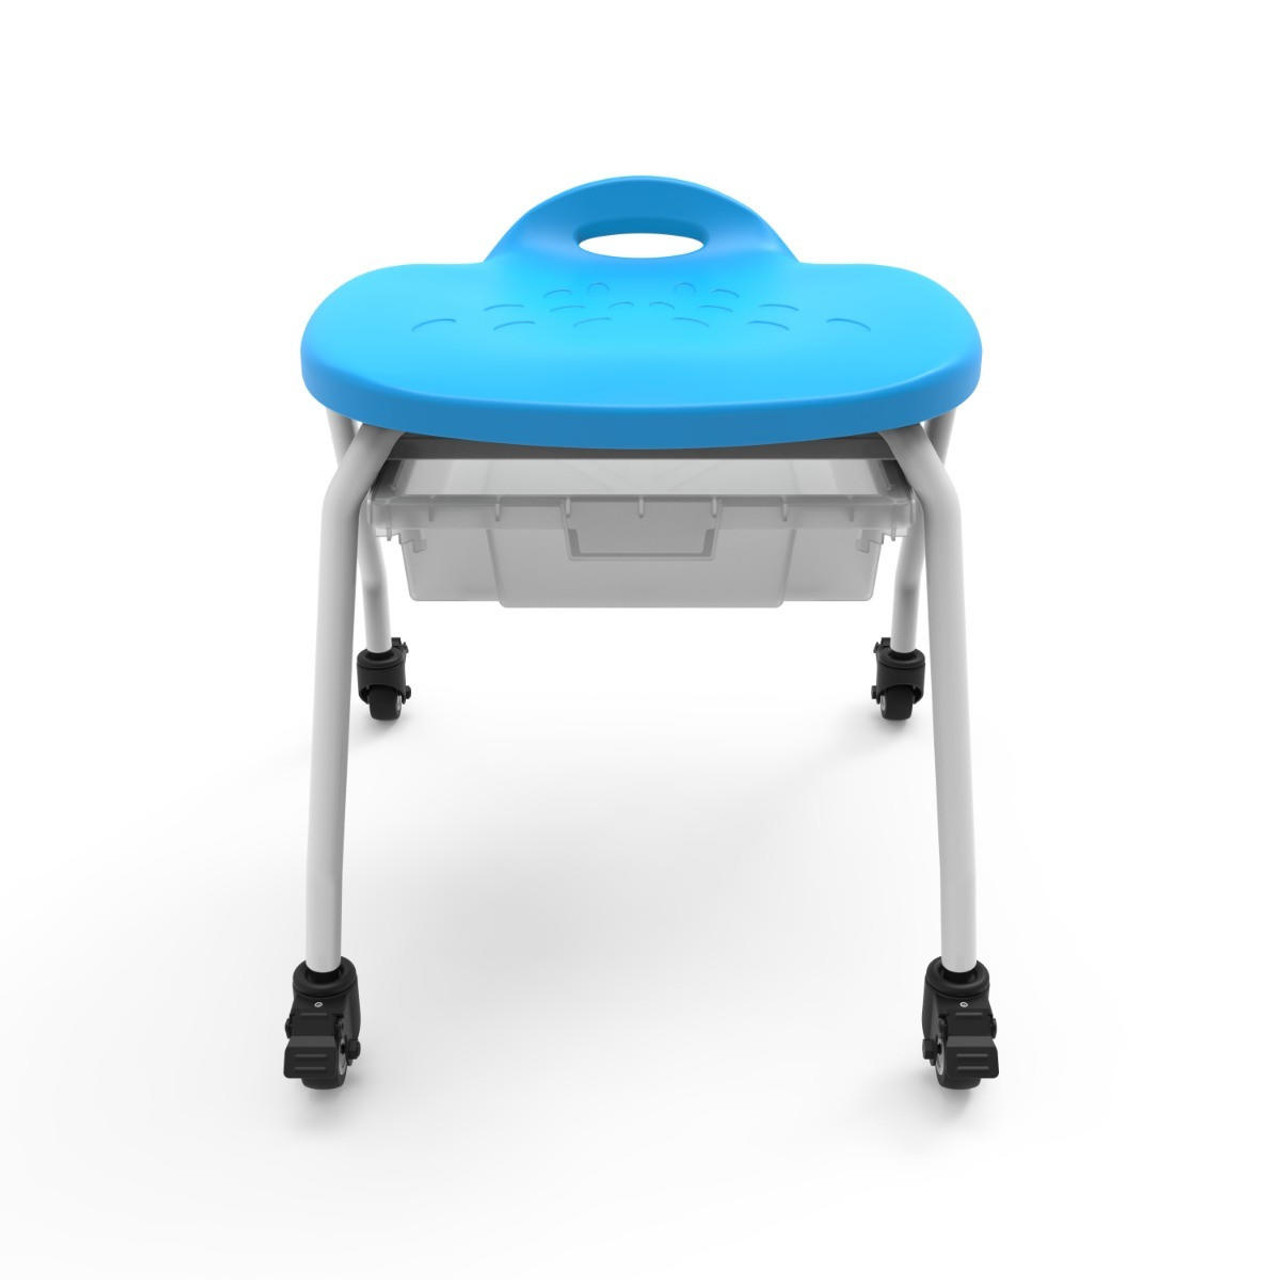 https://cdn11.bigcommerce.com/s-36yz7qwnyo/images/stencil/1280x1280/products/26697/71711/luxor-stackable-classroom-stool-with-wheels-and-storage__07346.1677468307.jpg?c=1